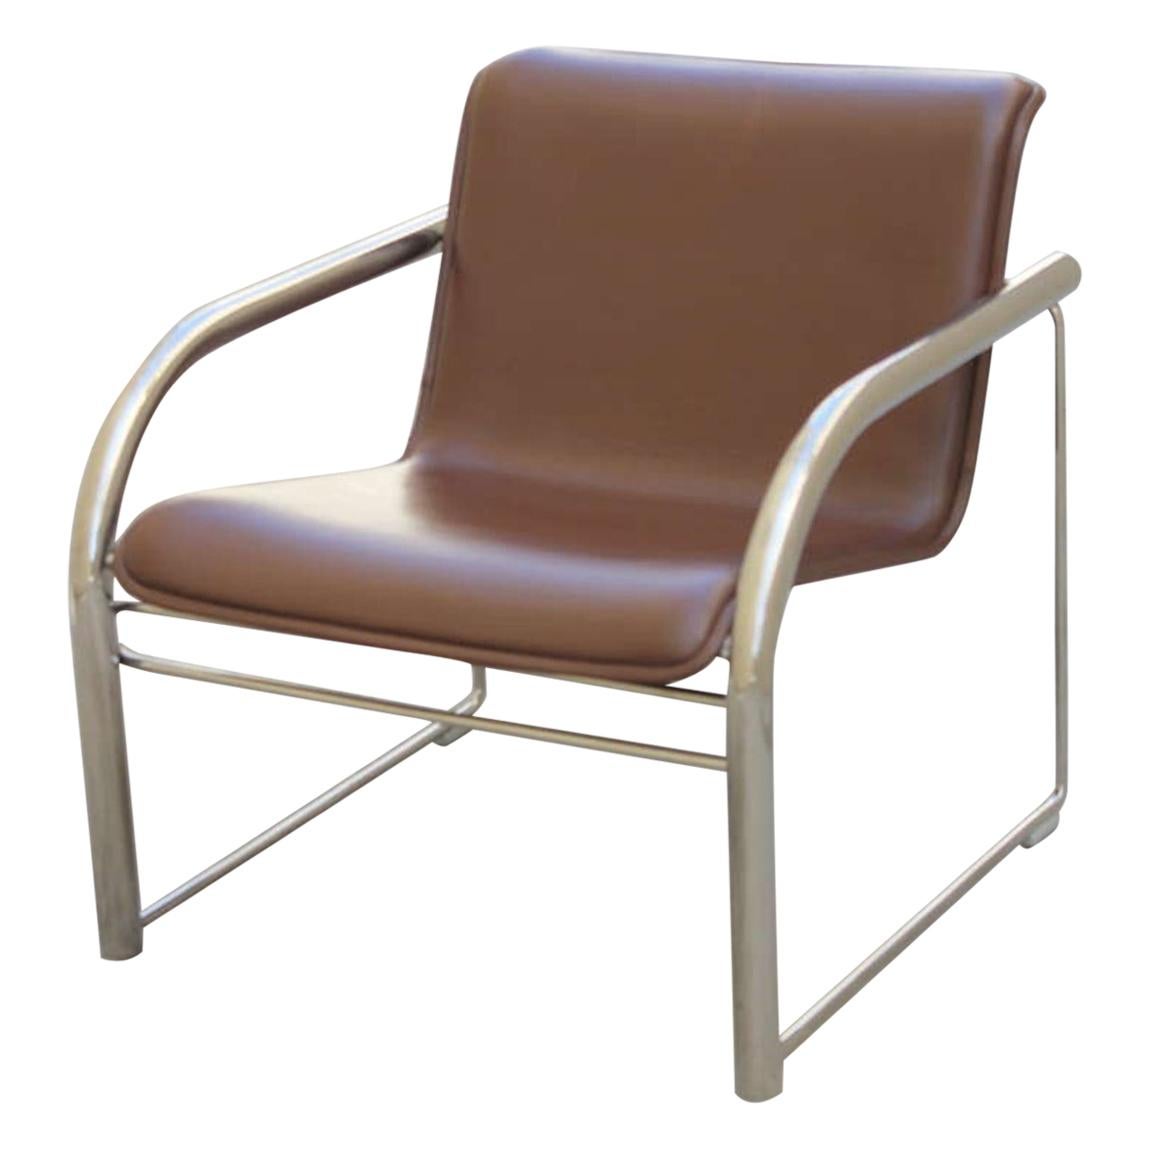 Pair of Richard Schultz leather and chrome RS48 lounge chairs from Nienkamper. Leather and chrome lounge chairs. Designed by Richard Schultz in 1987.

All items are viewable at our Los Angeles Arts District showroom and warehouse. 